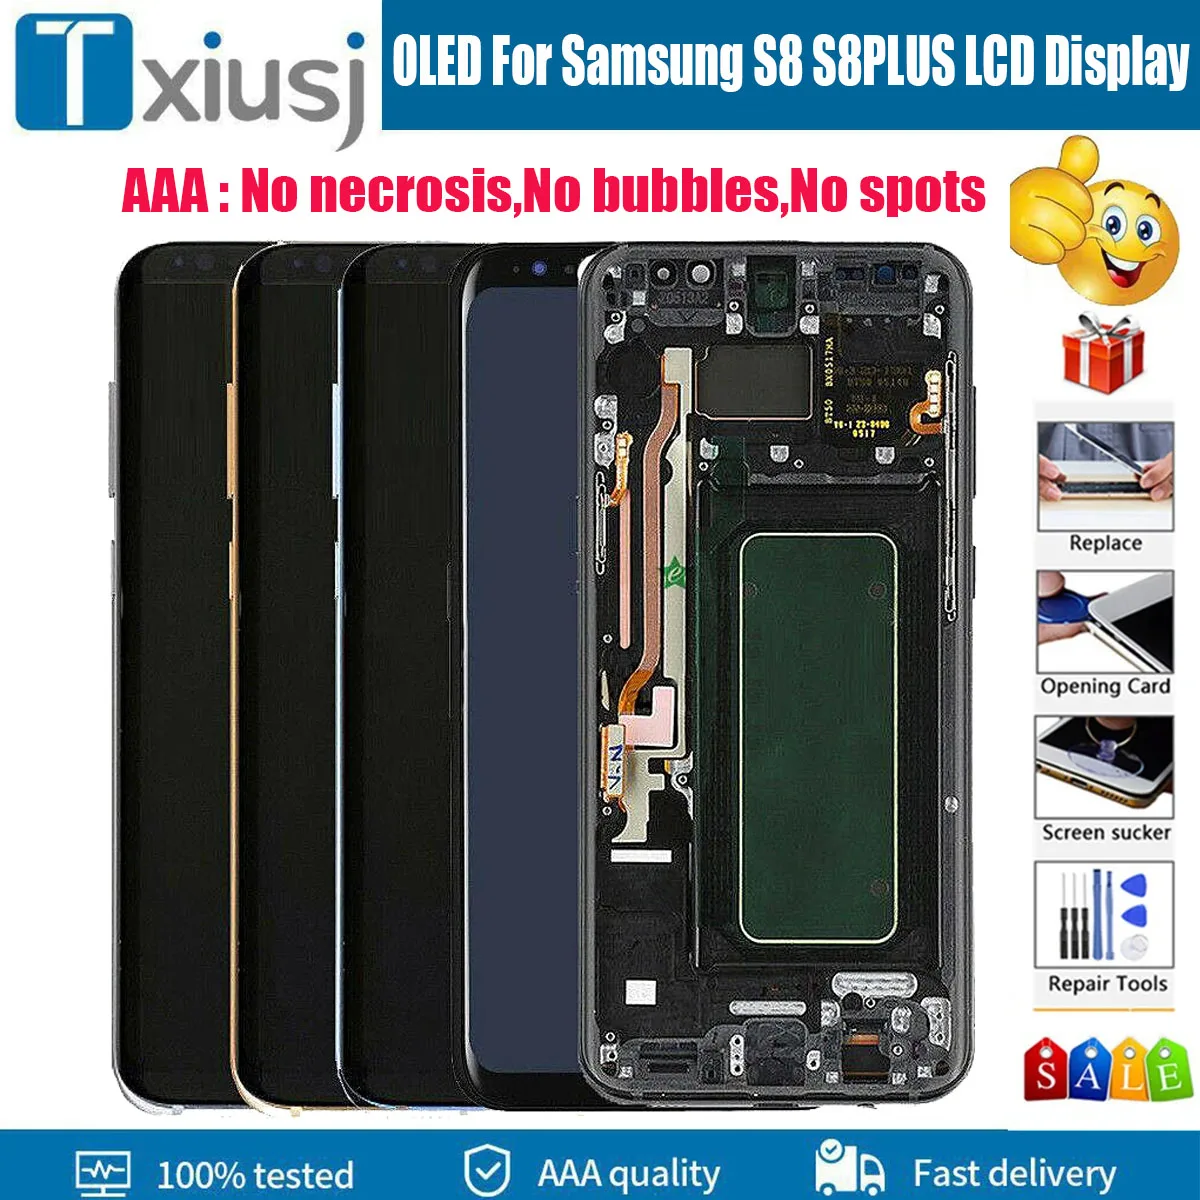 

AAA OLED Super AMOLED For SAMSUNG GALAXY S8 S8 Plus Display LCD G950F G955 G955F G955A LCD Touch Screen Digitizer Assembly Frame